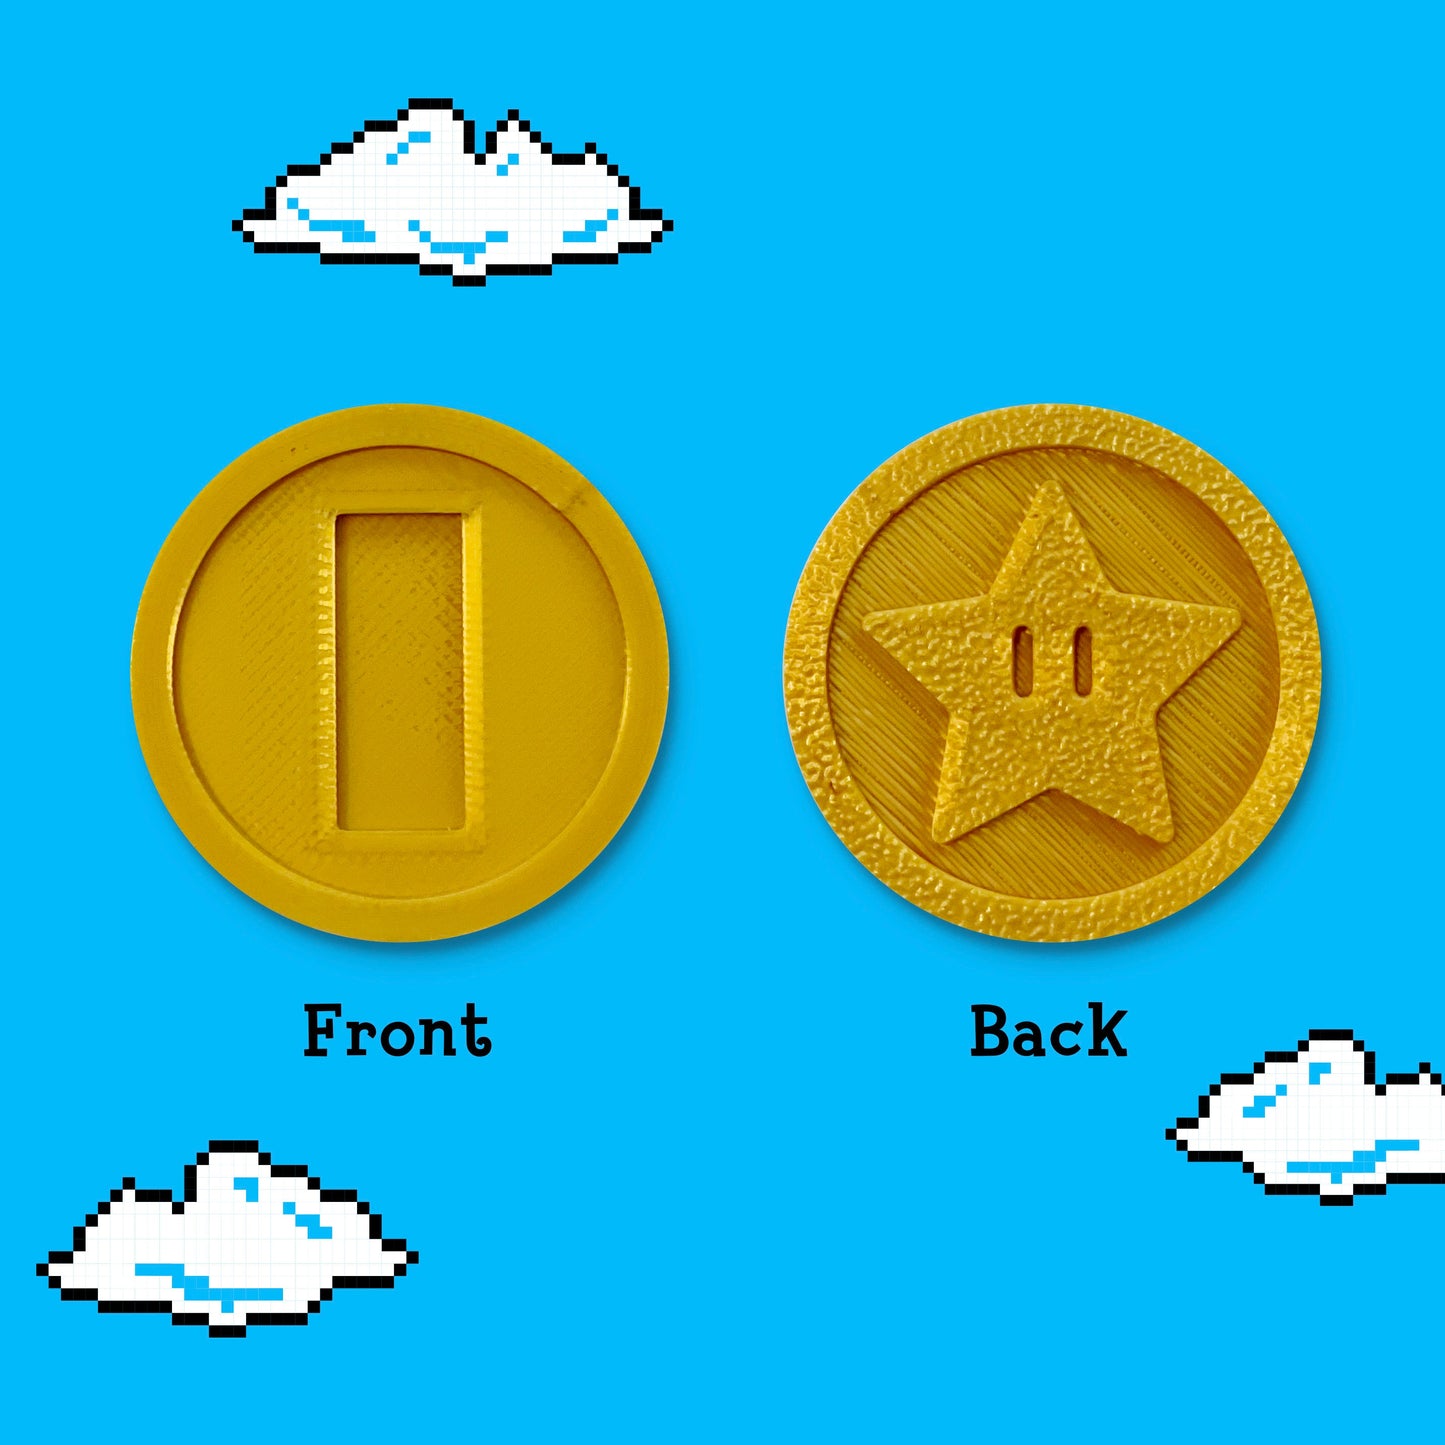 Mario Replica Coins for Cosplay, Party Favors